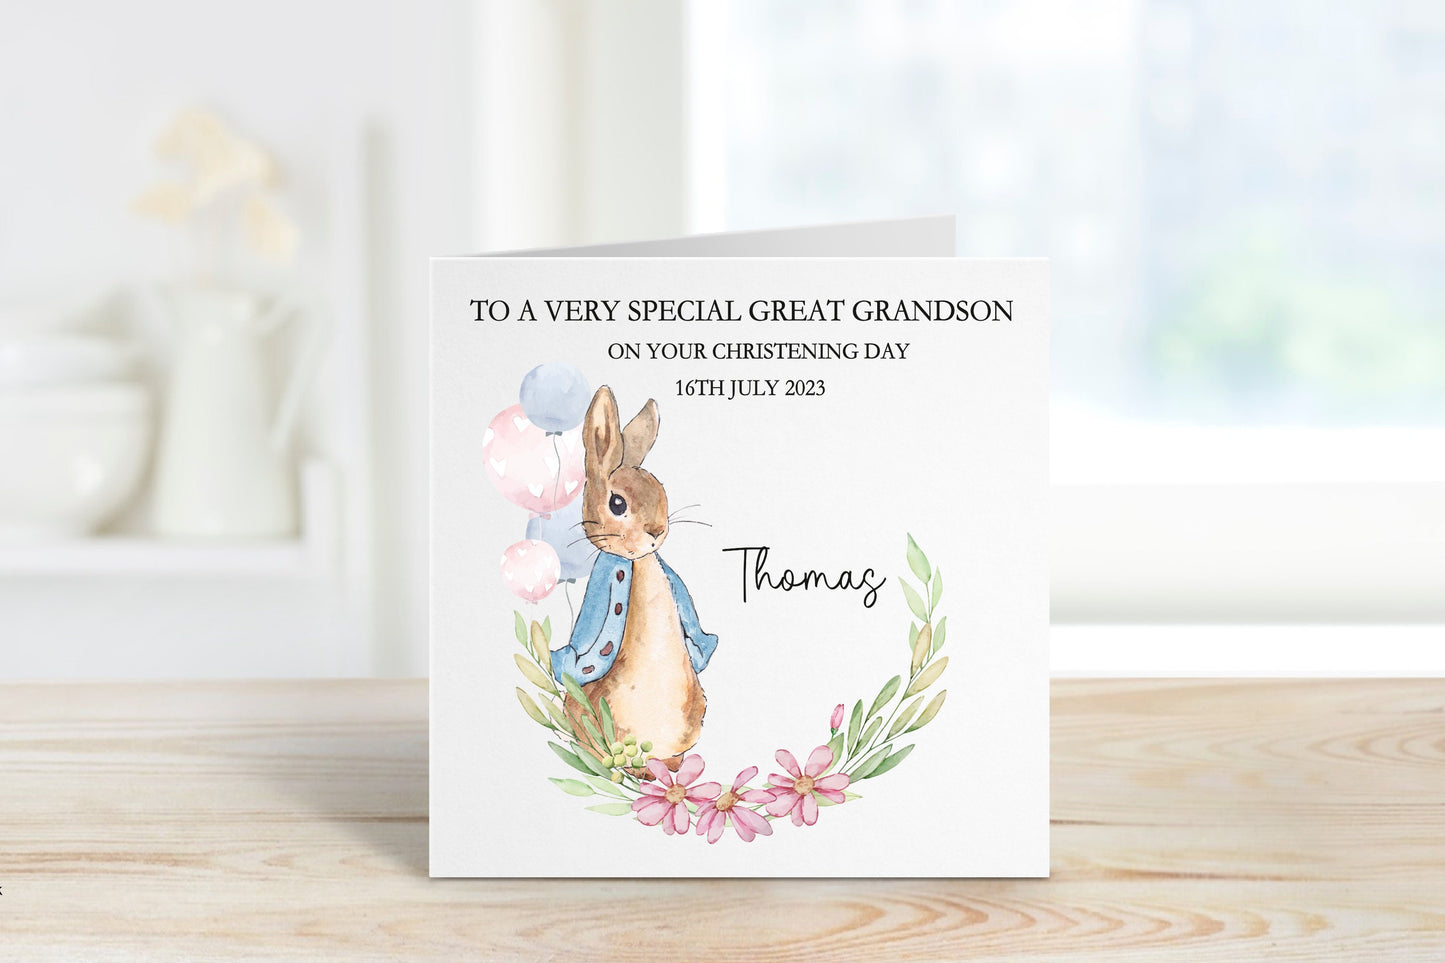 Son Christening Card, Personalised Christening Card, Christening Card For Boys, Christening Card For Son